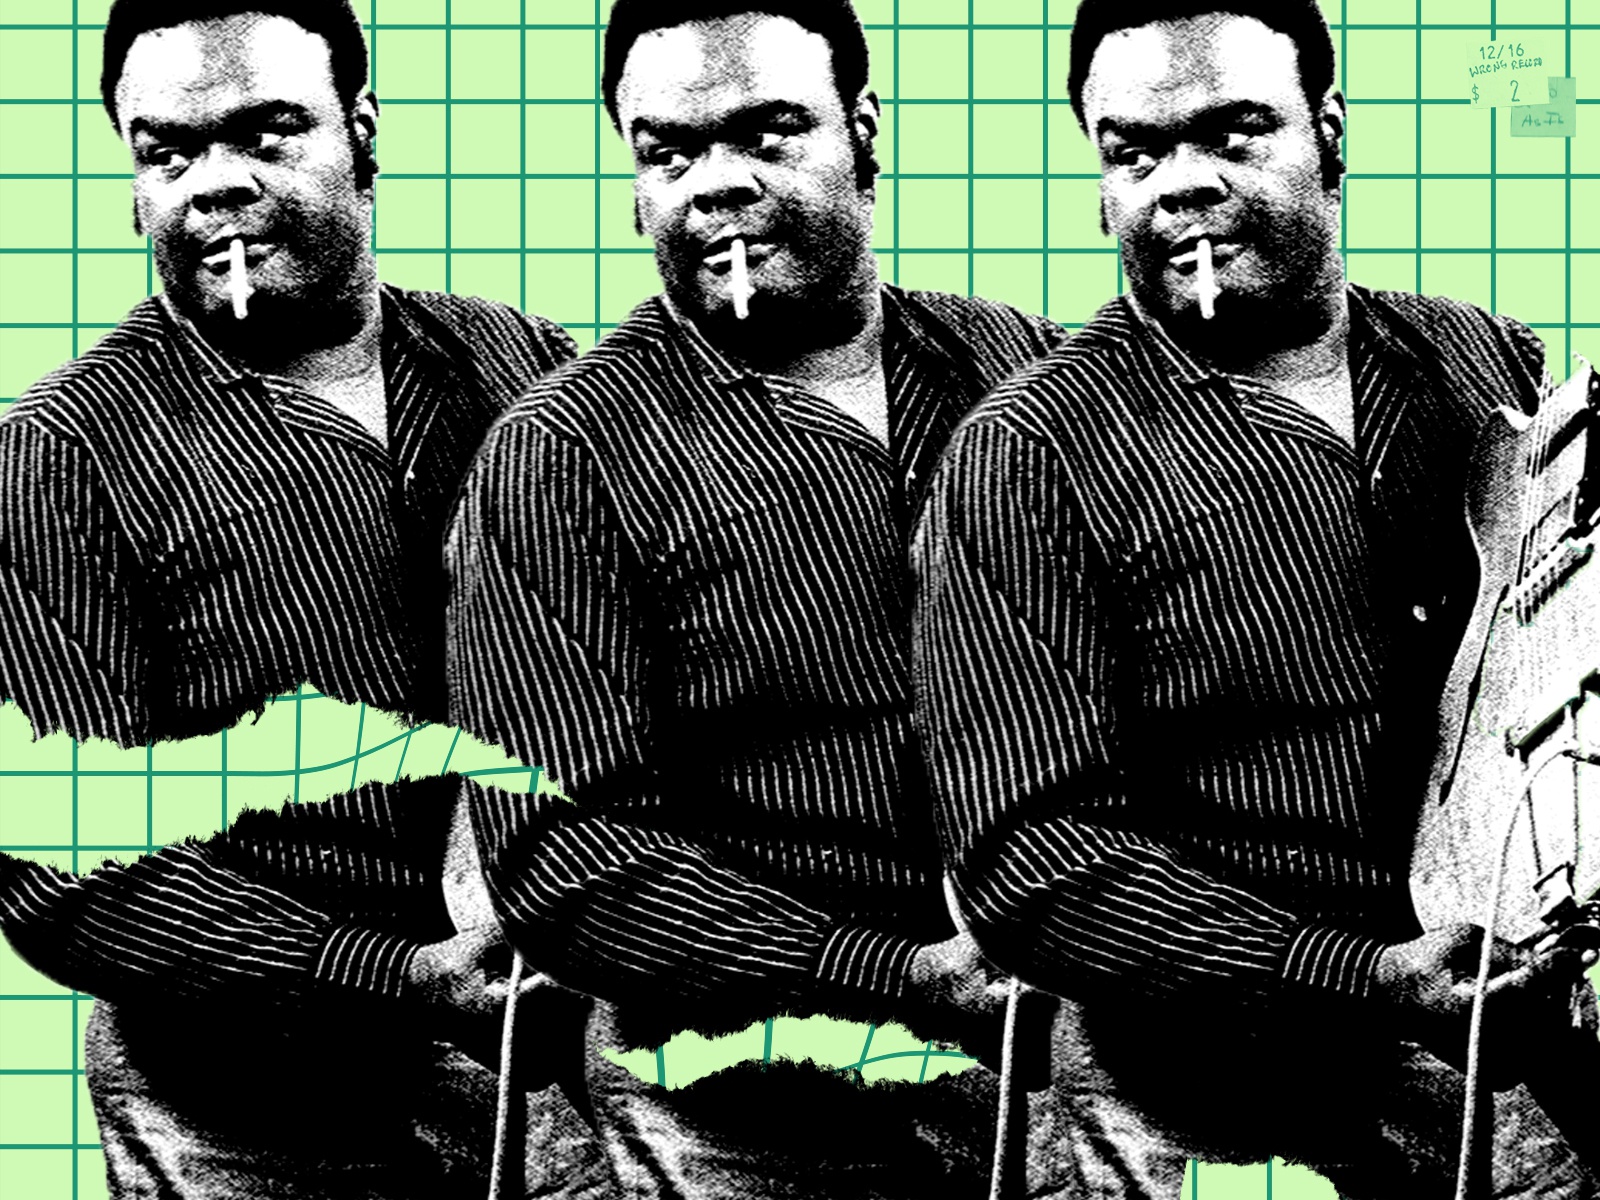 Re:Record Project 007: Freddie King Getting Ready